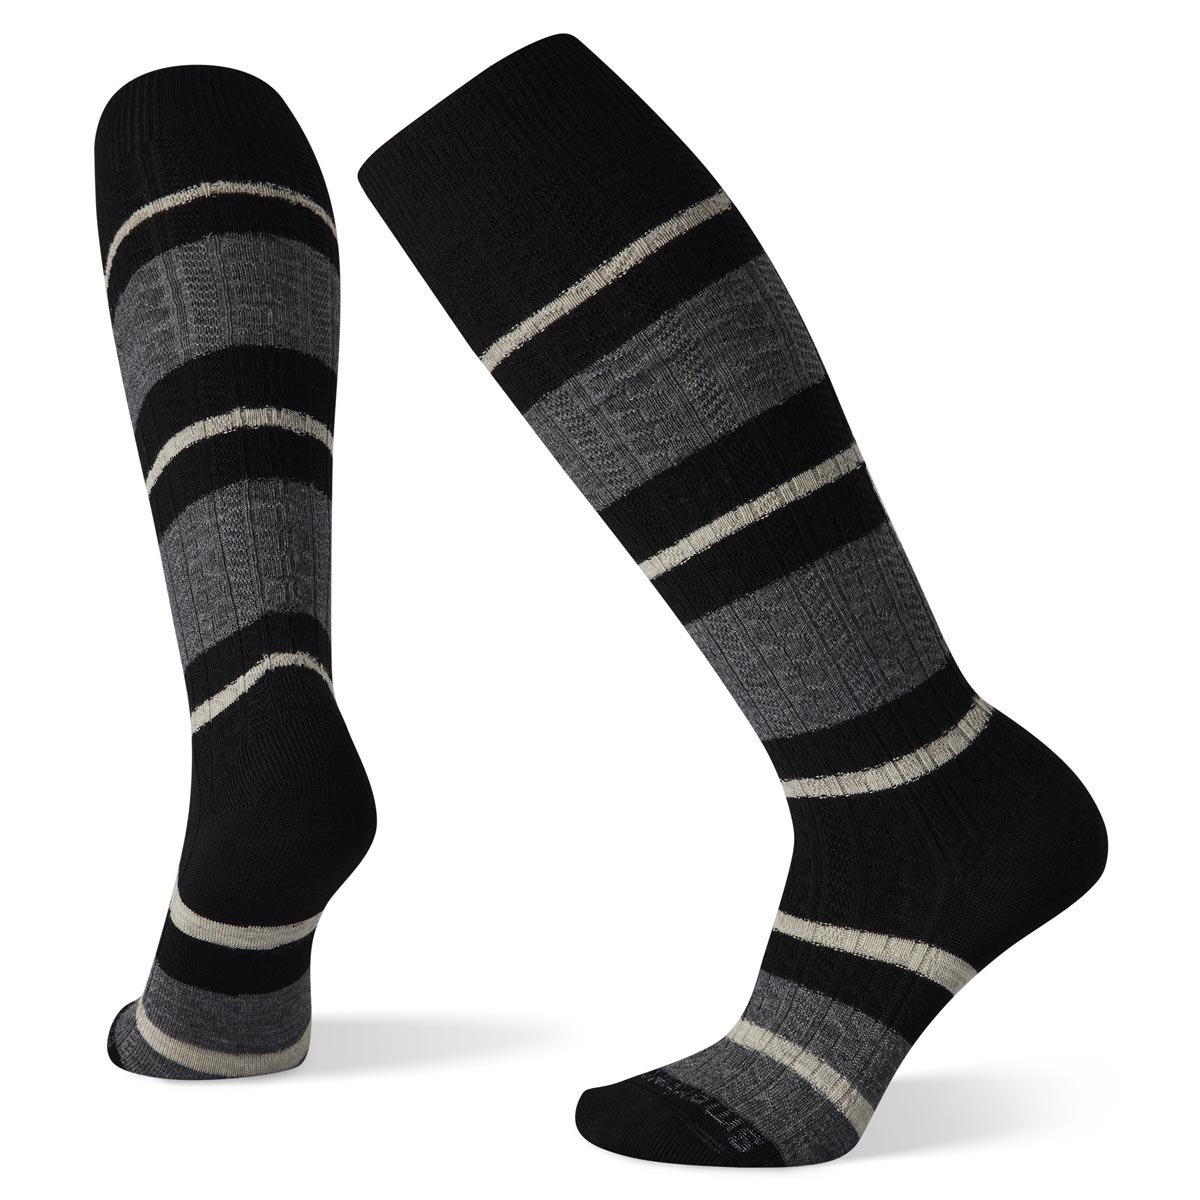 Smartwool Women's Everyday Striped Cable Knee High